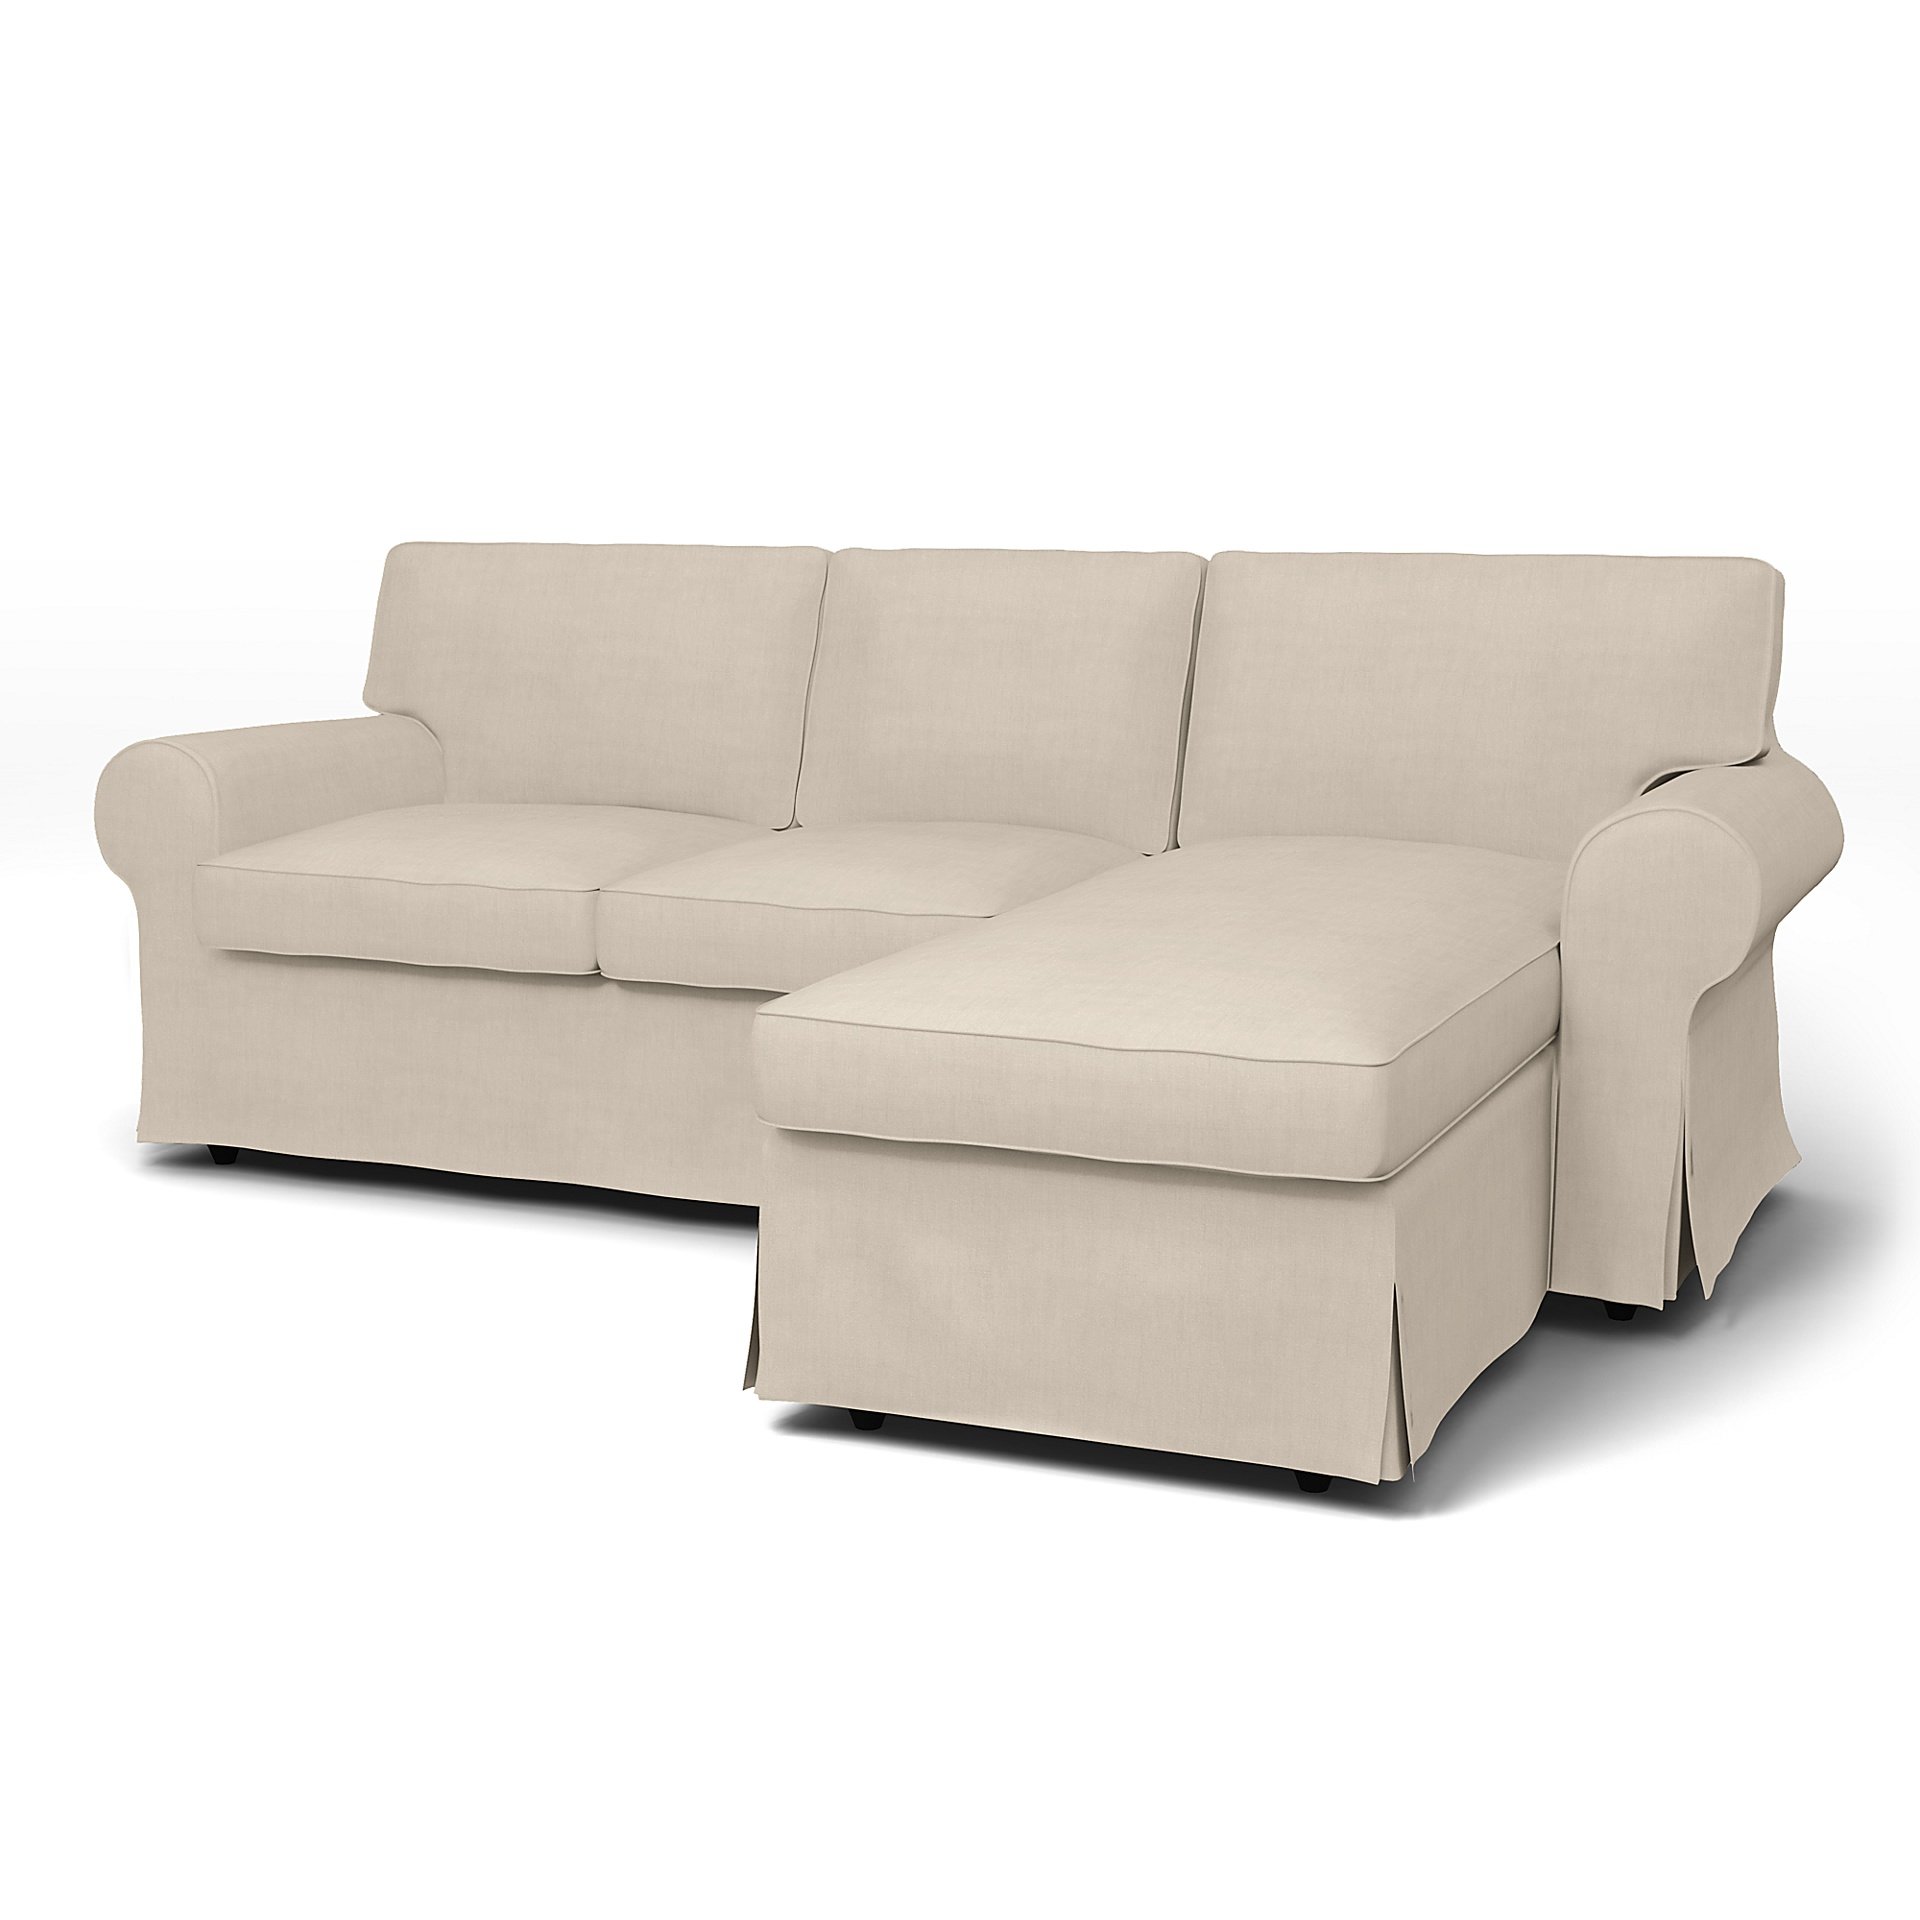 IKEA - Ektorp 3 Seater Sofa with Chaise Cover, Parchment, Linen - Bemz